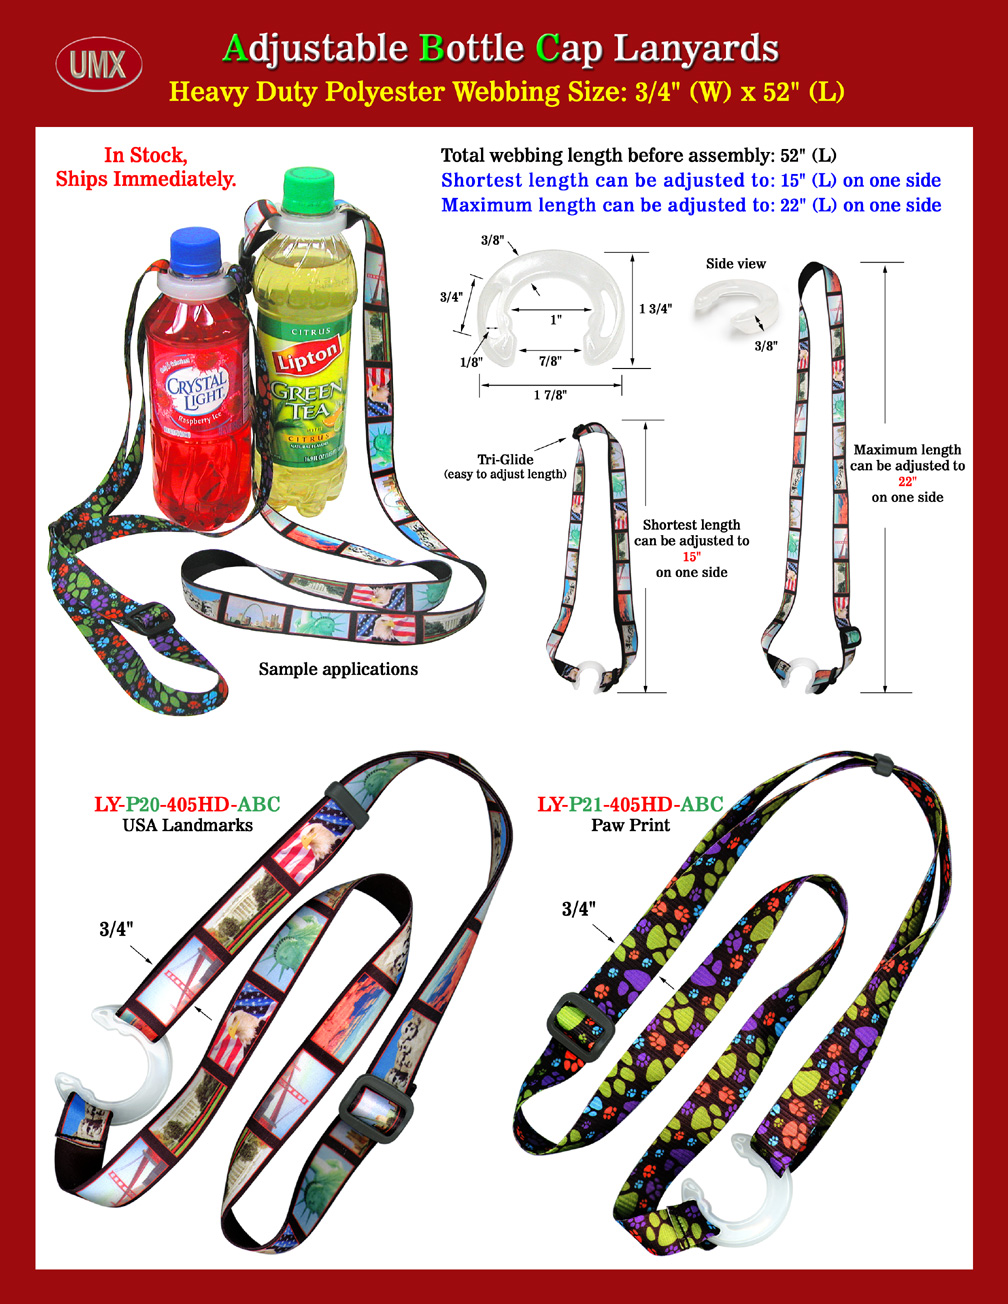 The main application of one end loop lanyards are using is the small loop-end to hang-on a variety of different devices, like hanging simple tools, displays, devices, meters, furniture accessories, luggage accessories, computer parts and more.